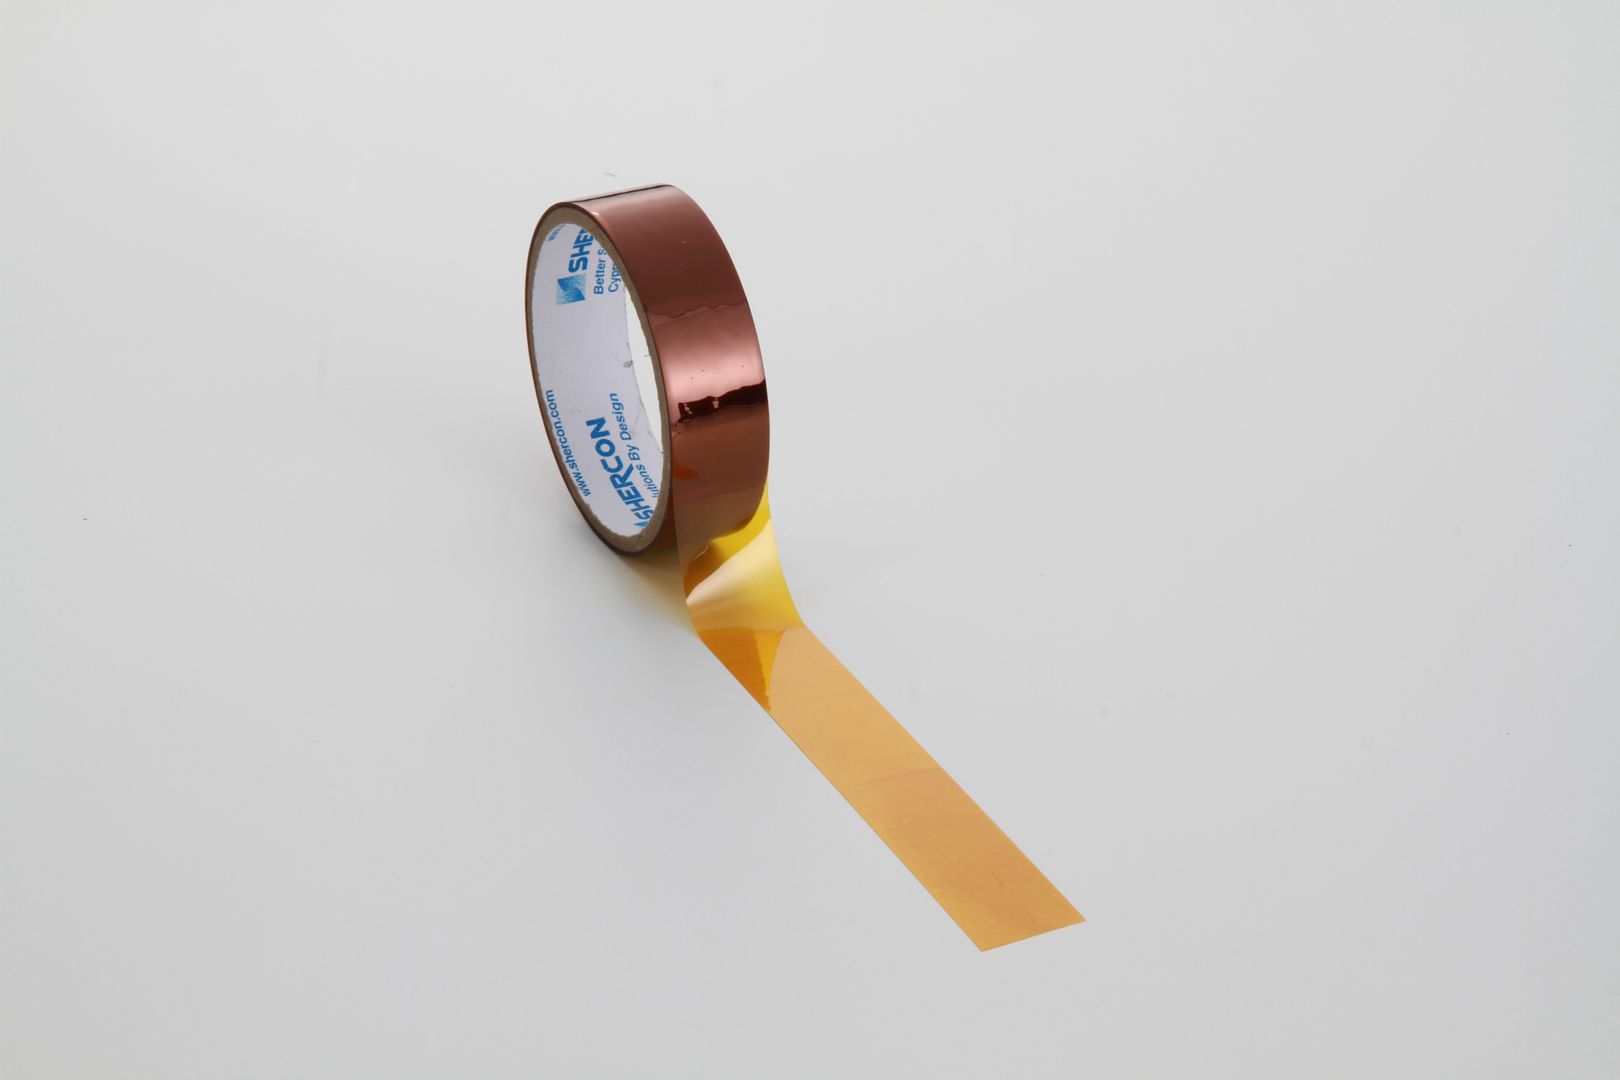 Caplugs - High Temperature Masking Tape: 110 mm Wide, 55 m Long, 7.5 mil  Thick, Off-White - 33550716 - MSC Industrial Supply